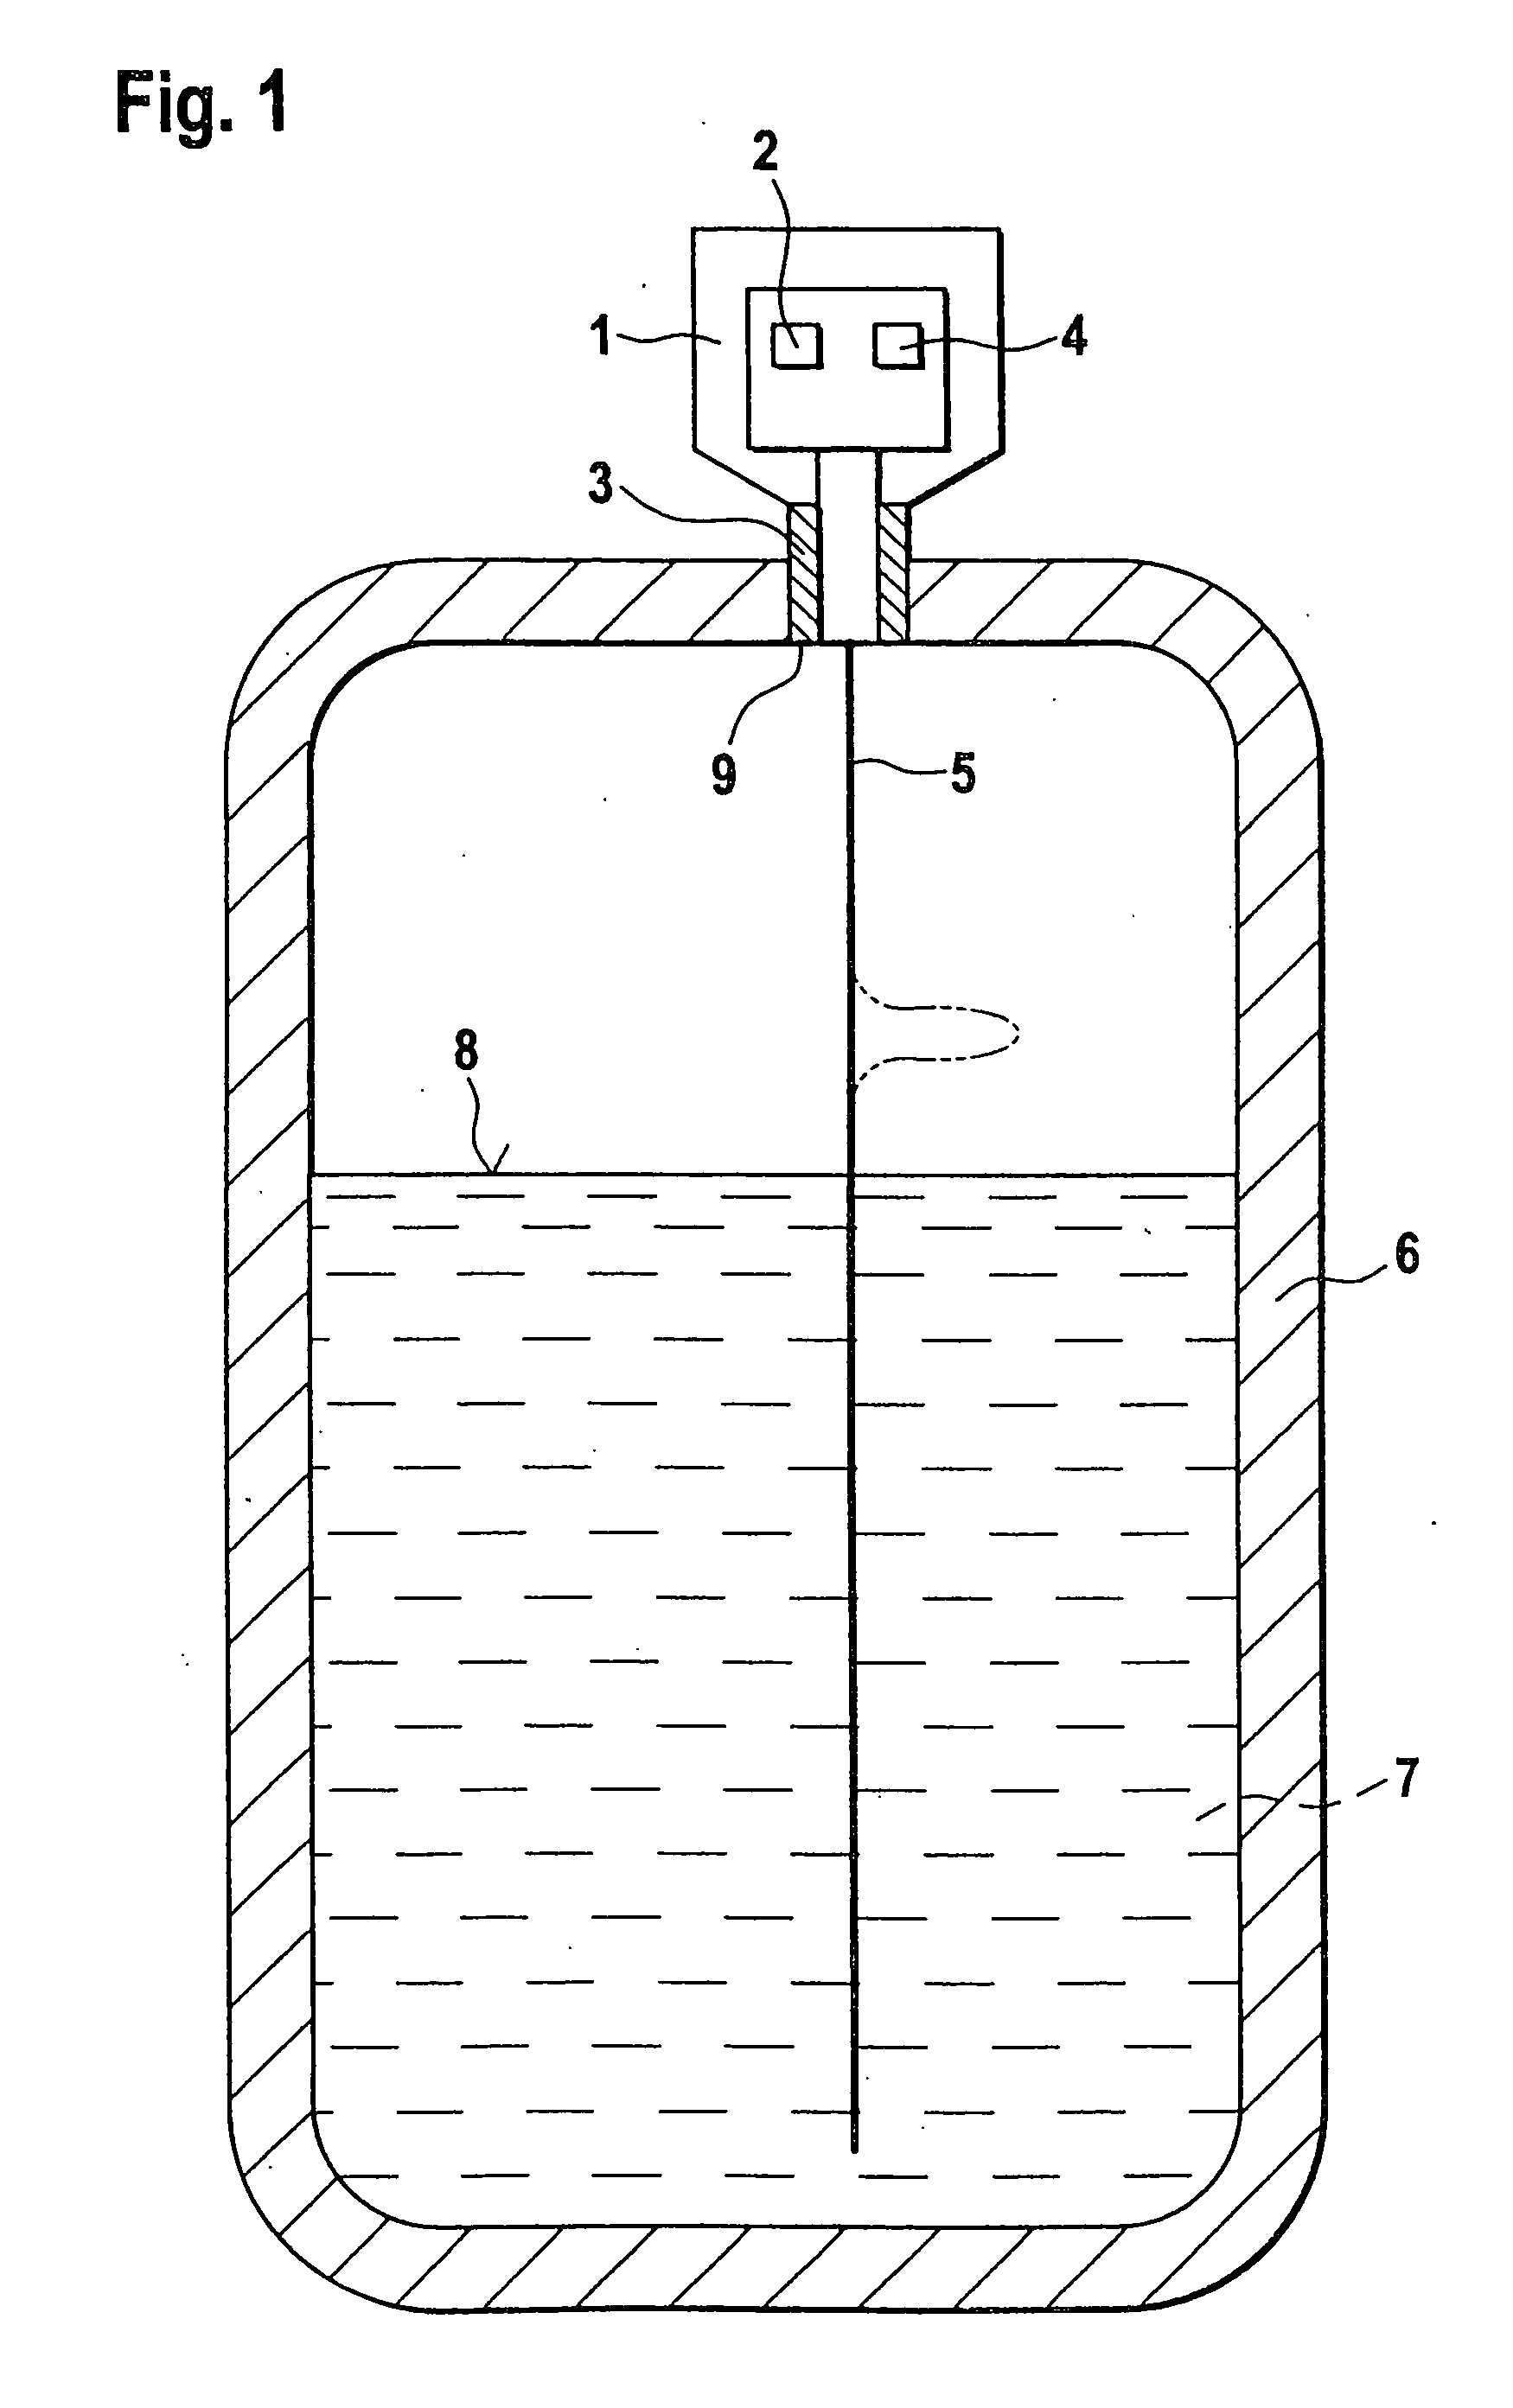 Apparatus for determining and/or monitoring the filling level of a product in a container